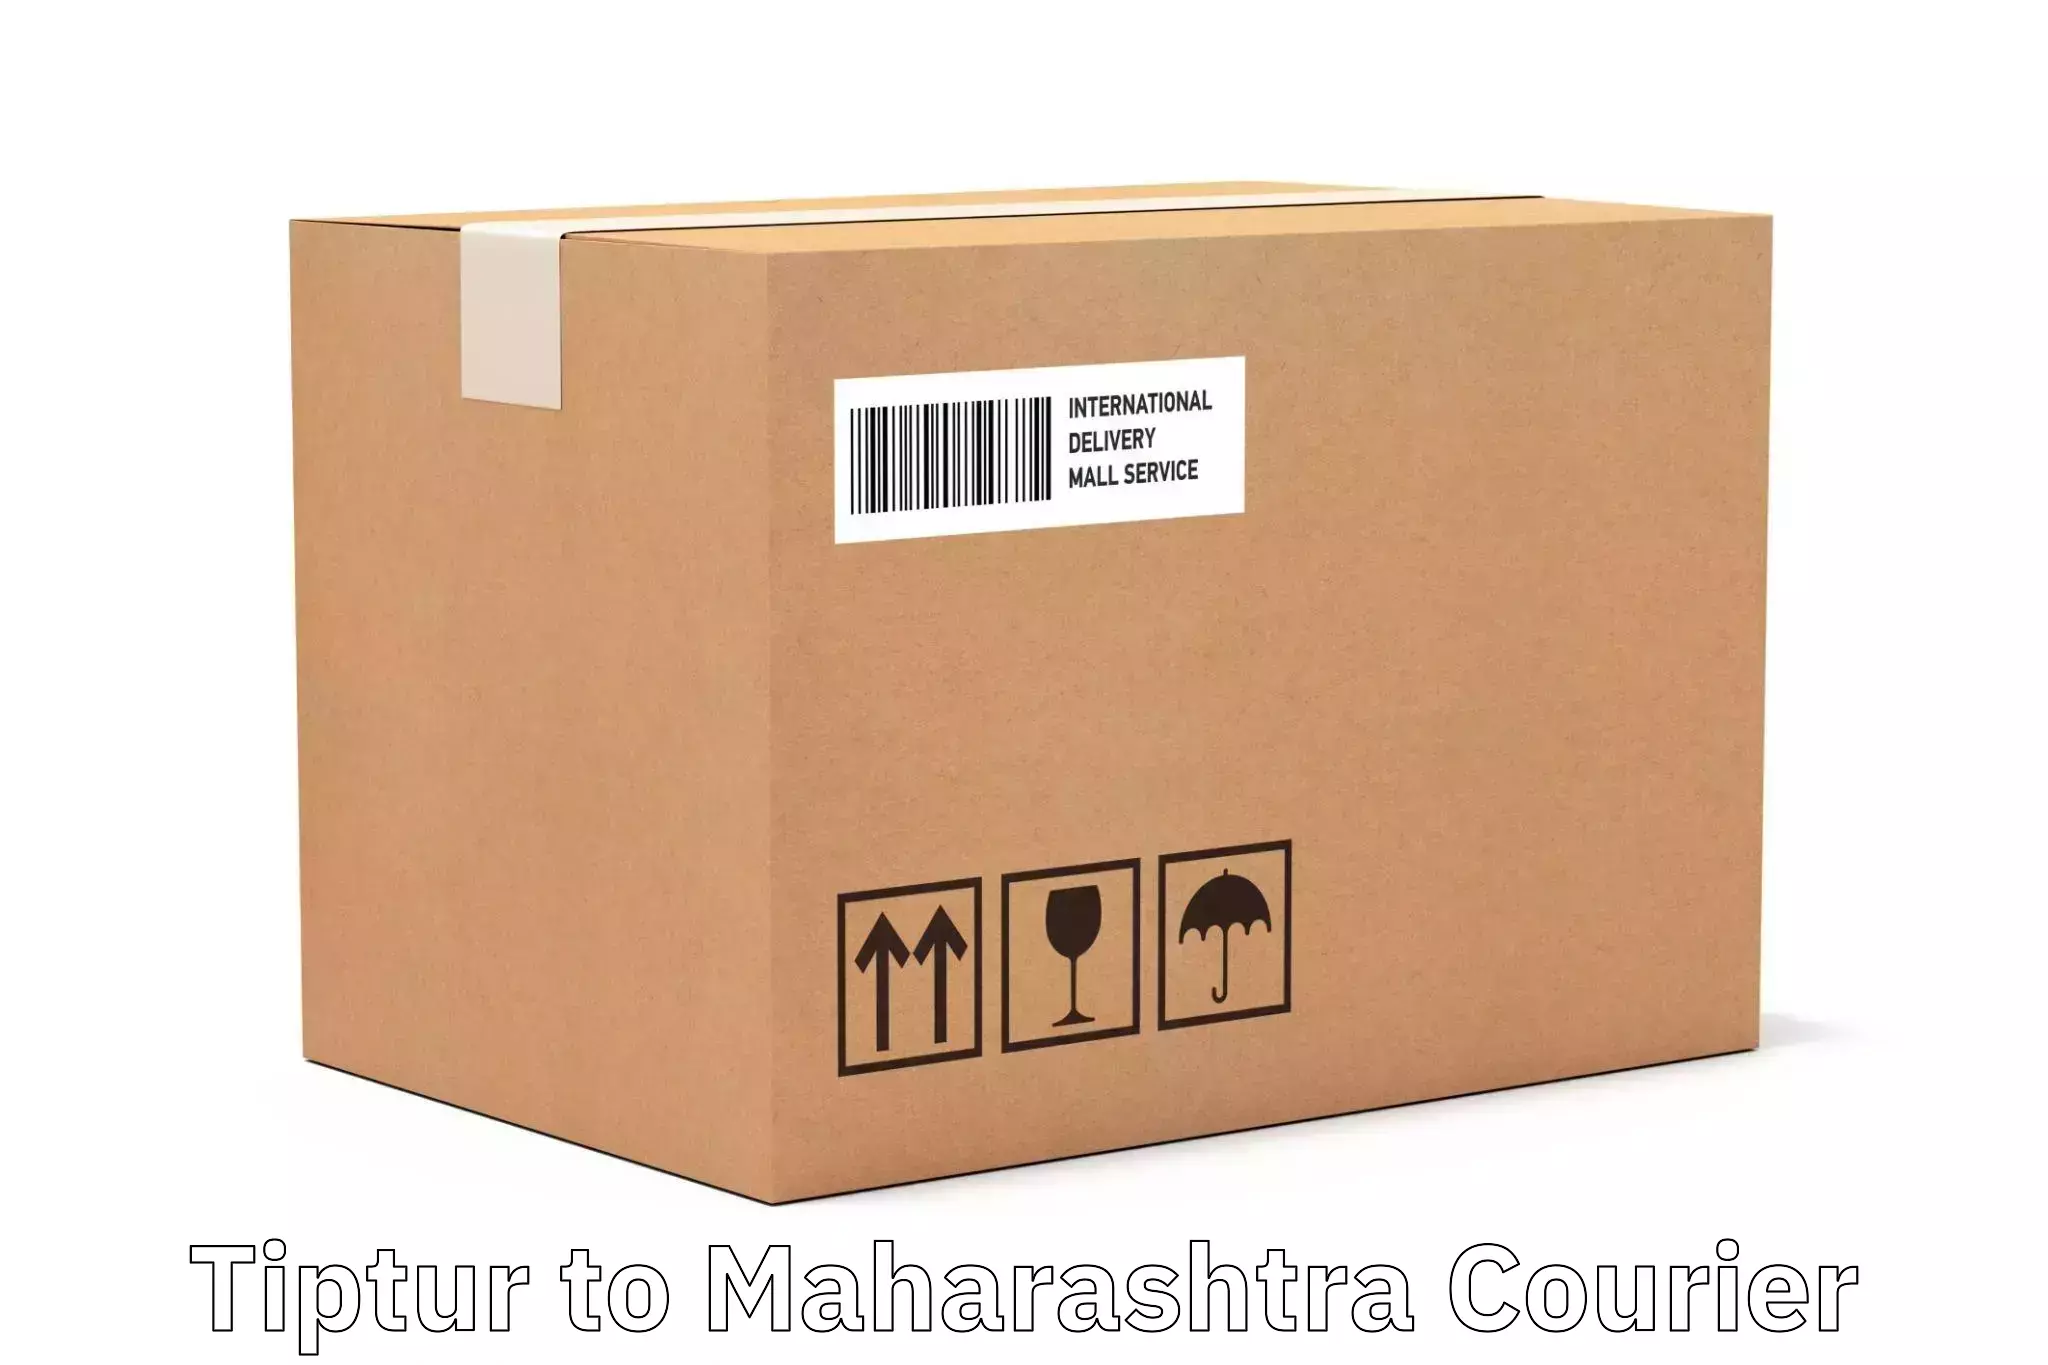 Nationwide courier service Tiptur to Talegaon Dabhade